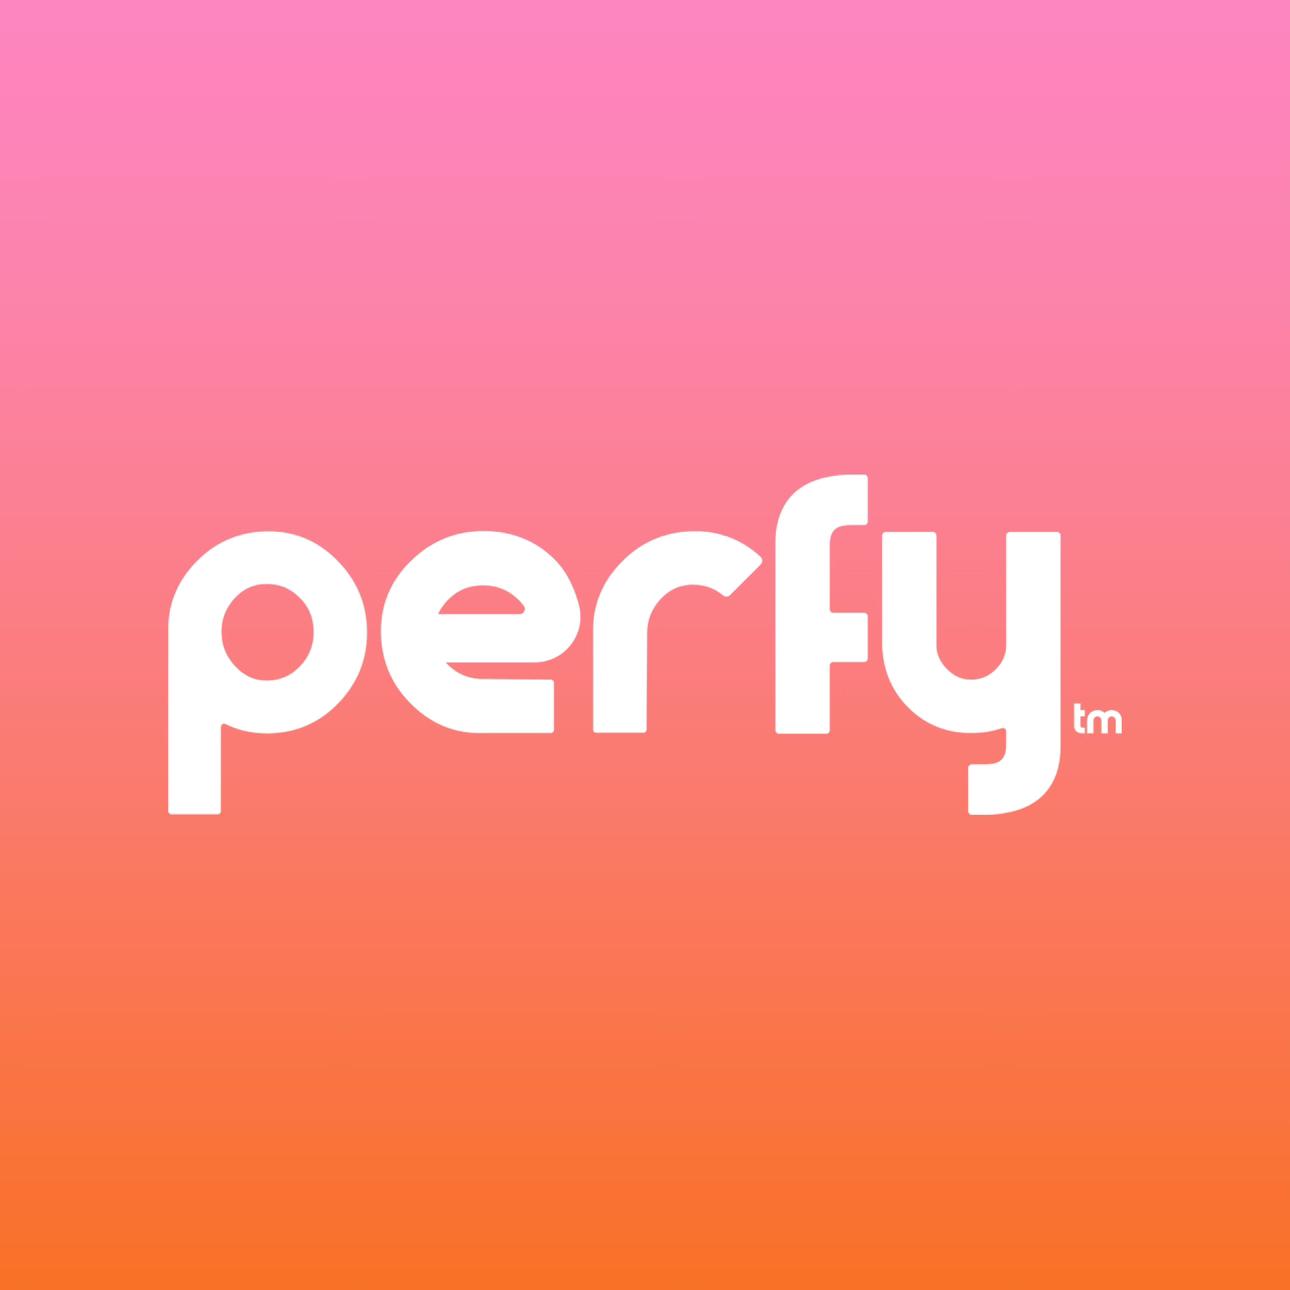 Perfy's images